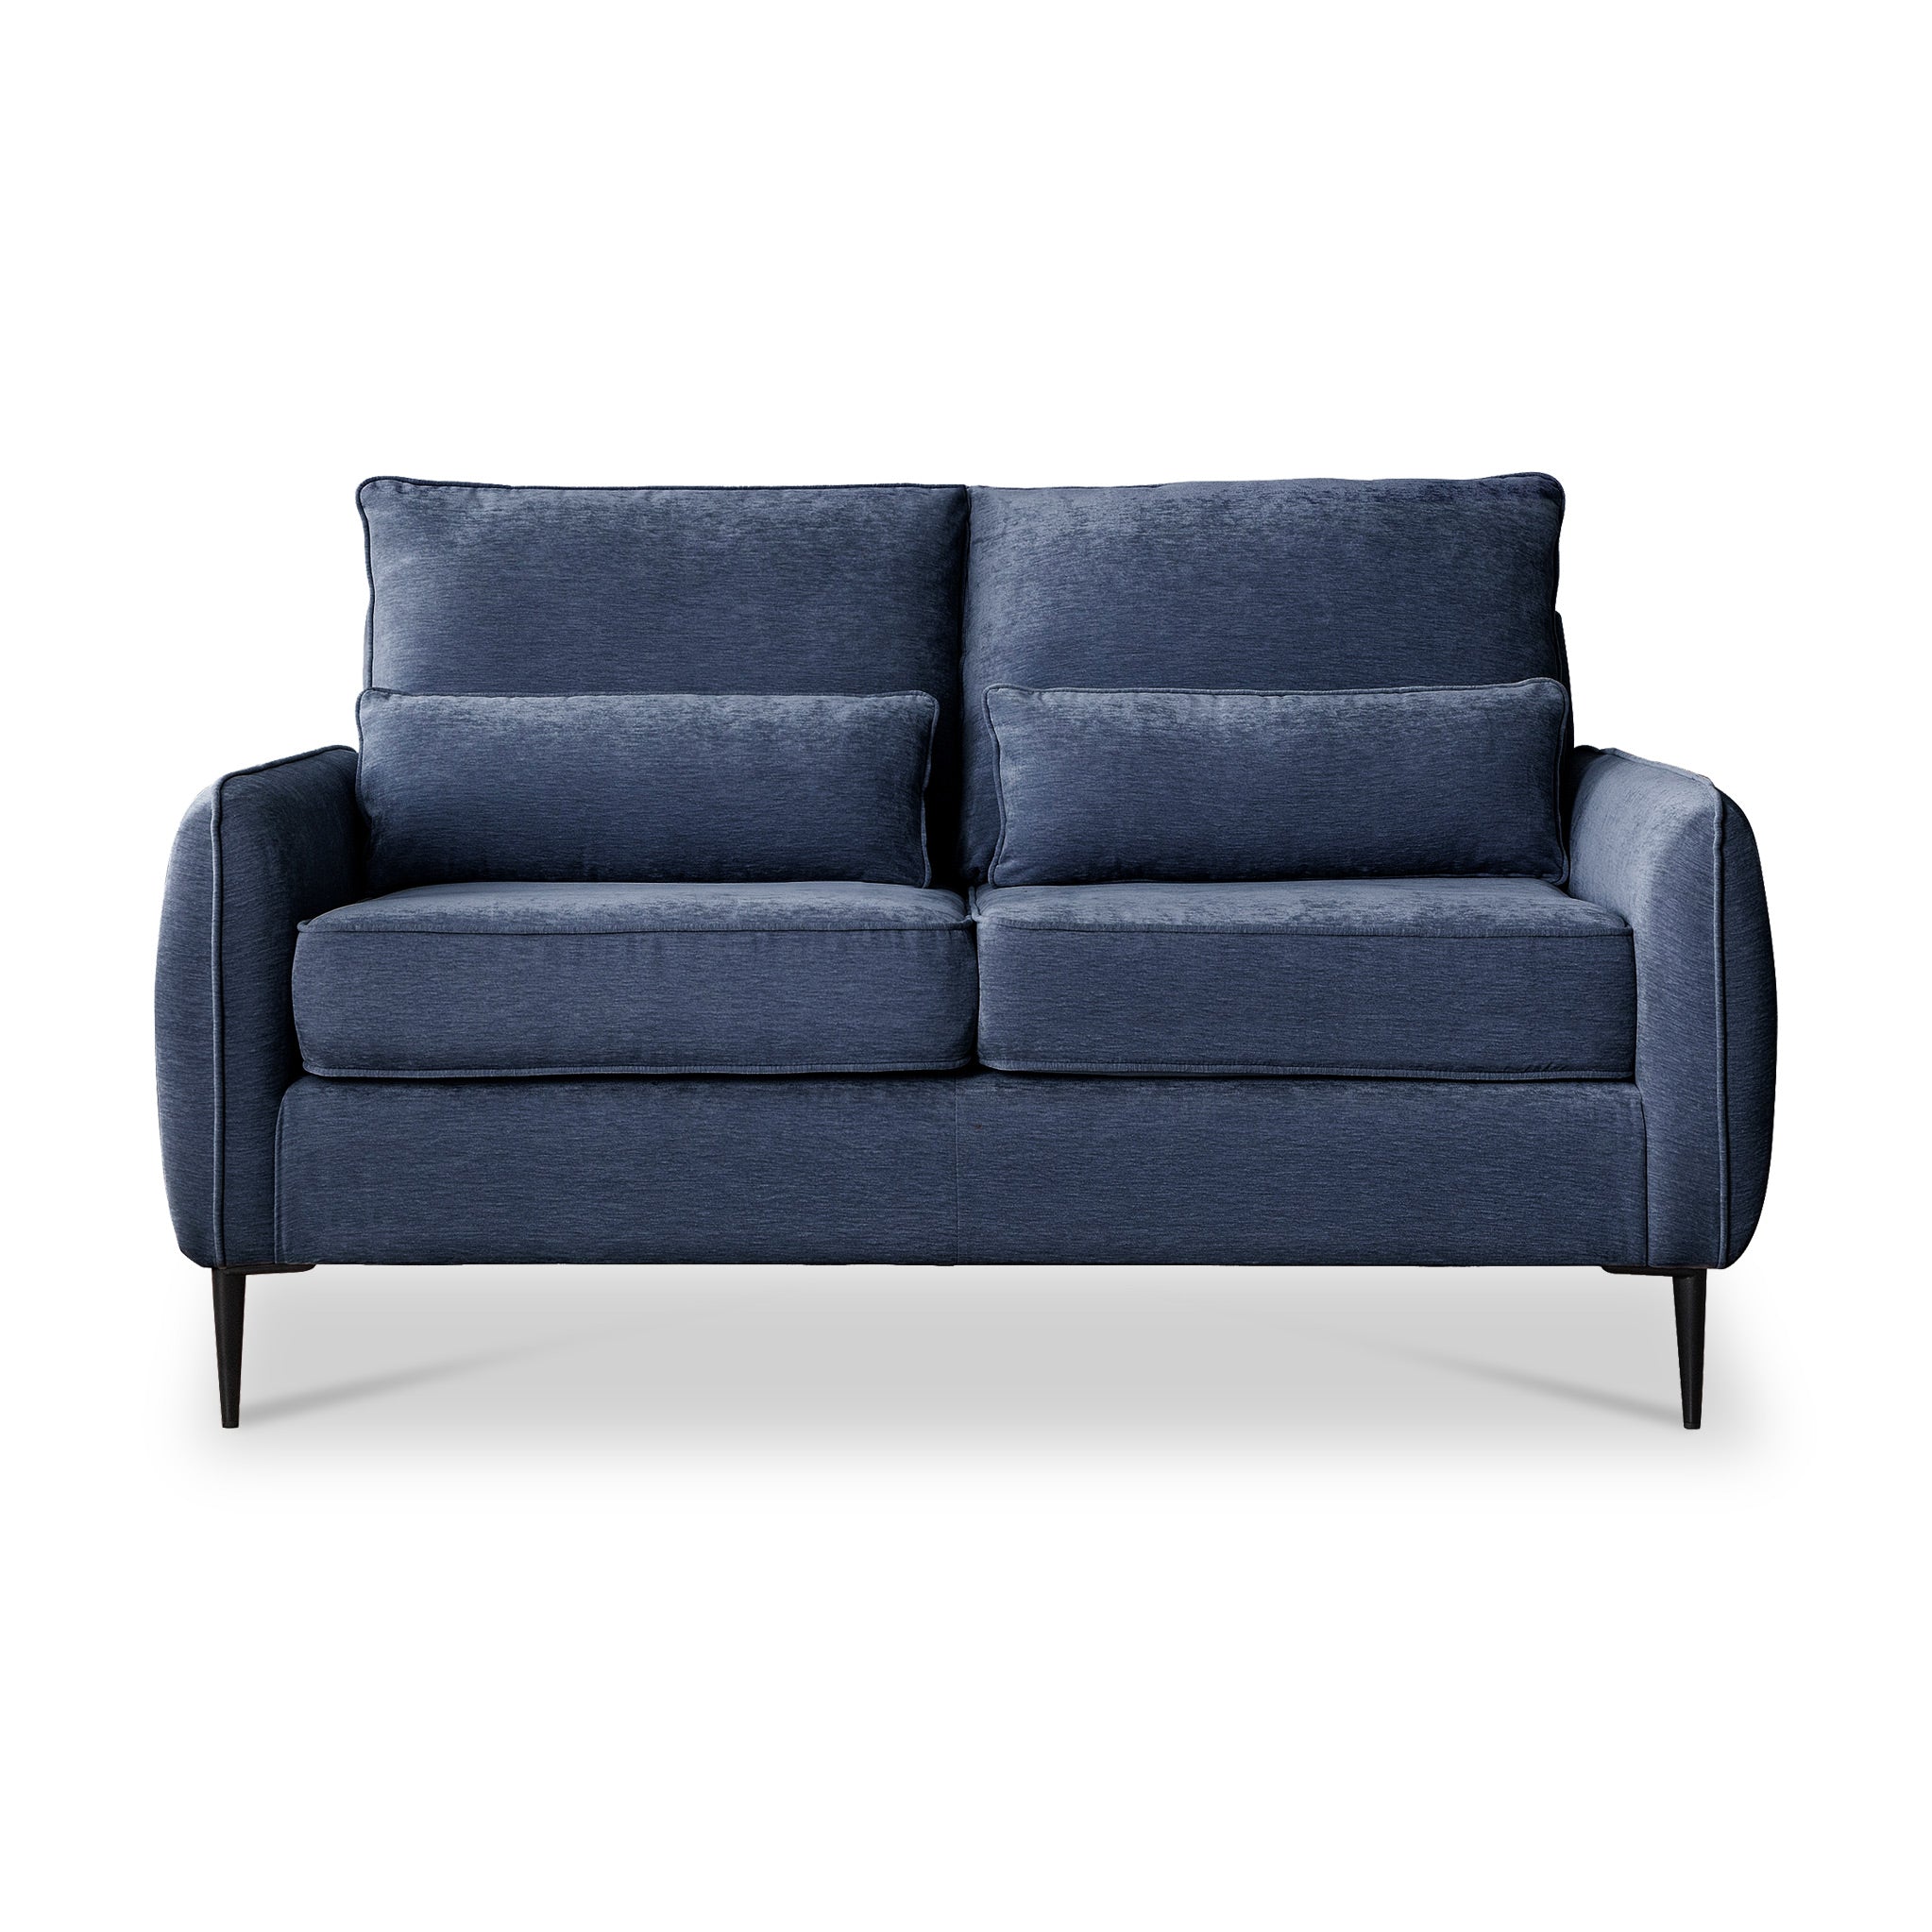 Oswald 2 Seater Sofas Modern Grey Or Blue Living Room Fabric Couch